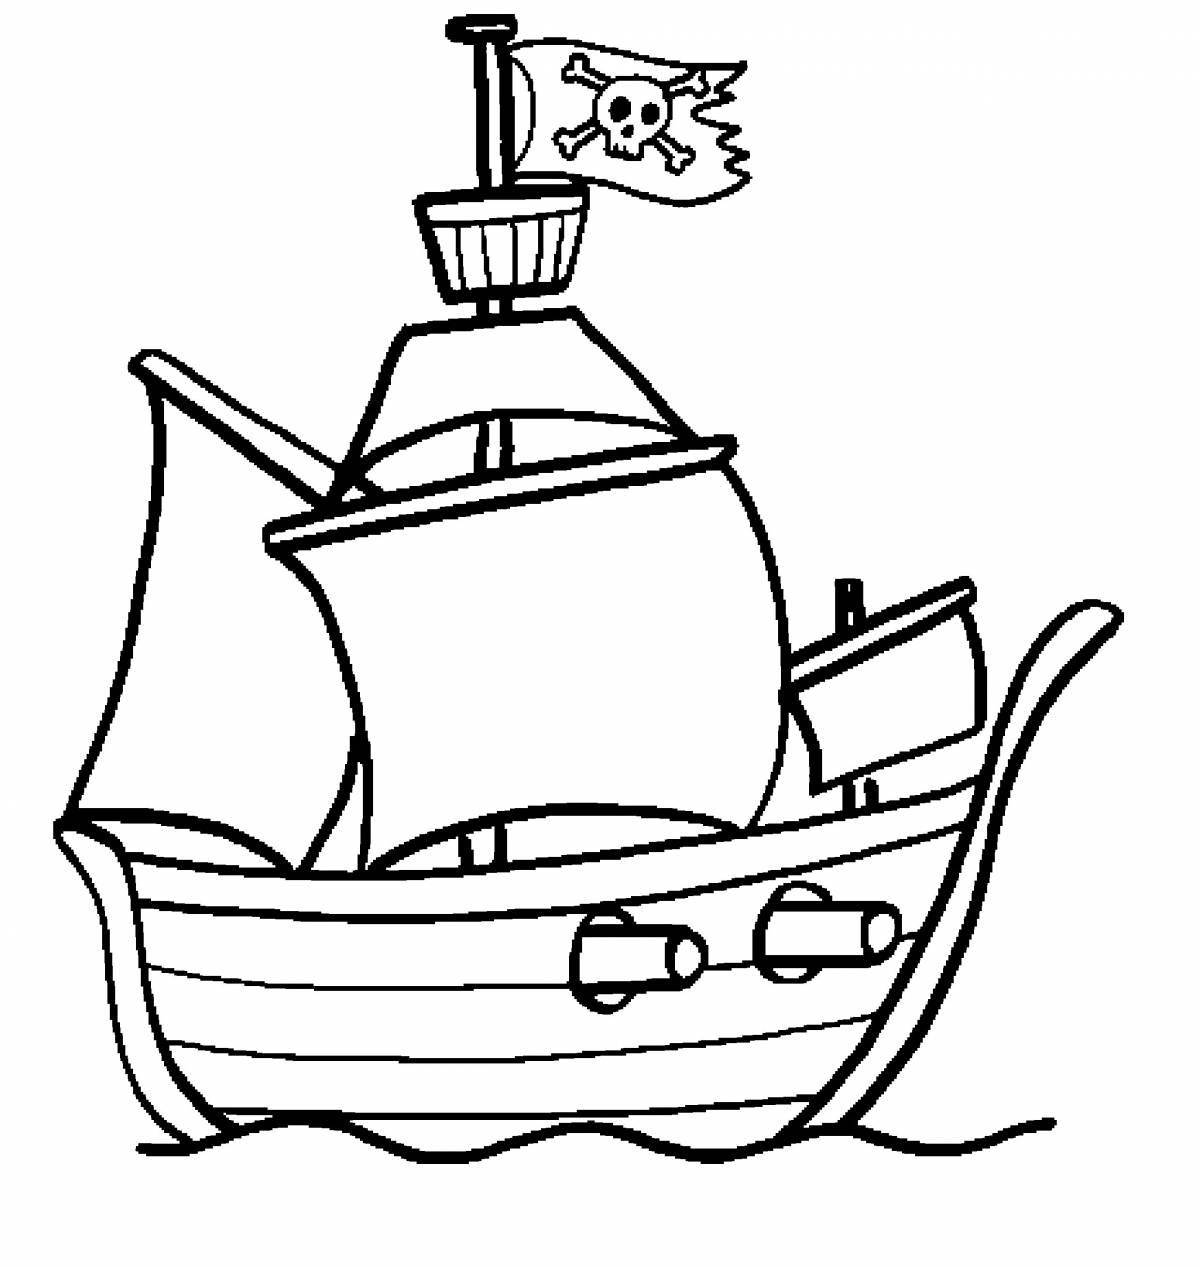 Vibrant pirate ship coloring page for kids